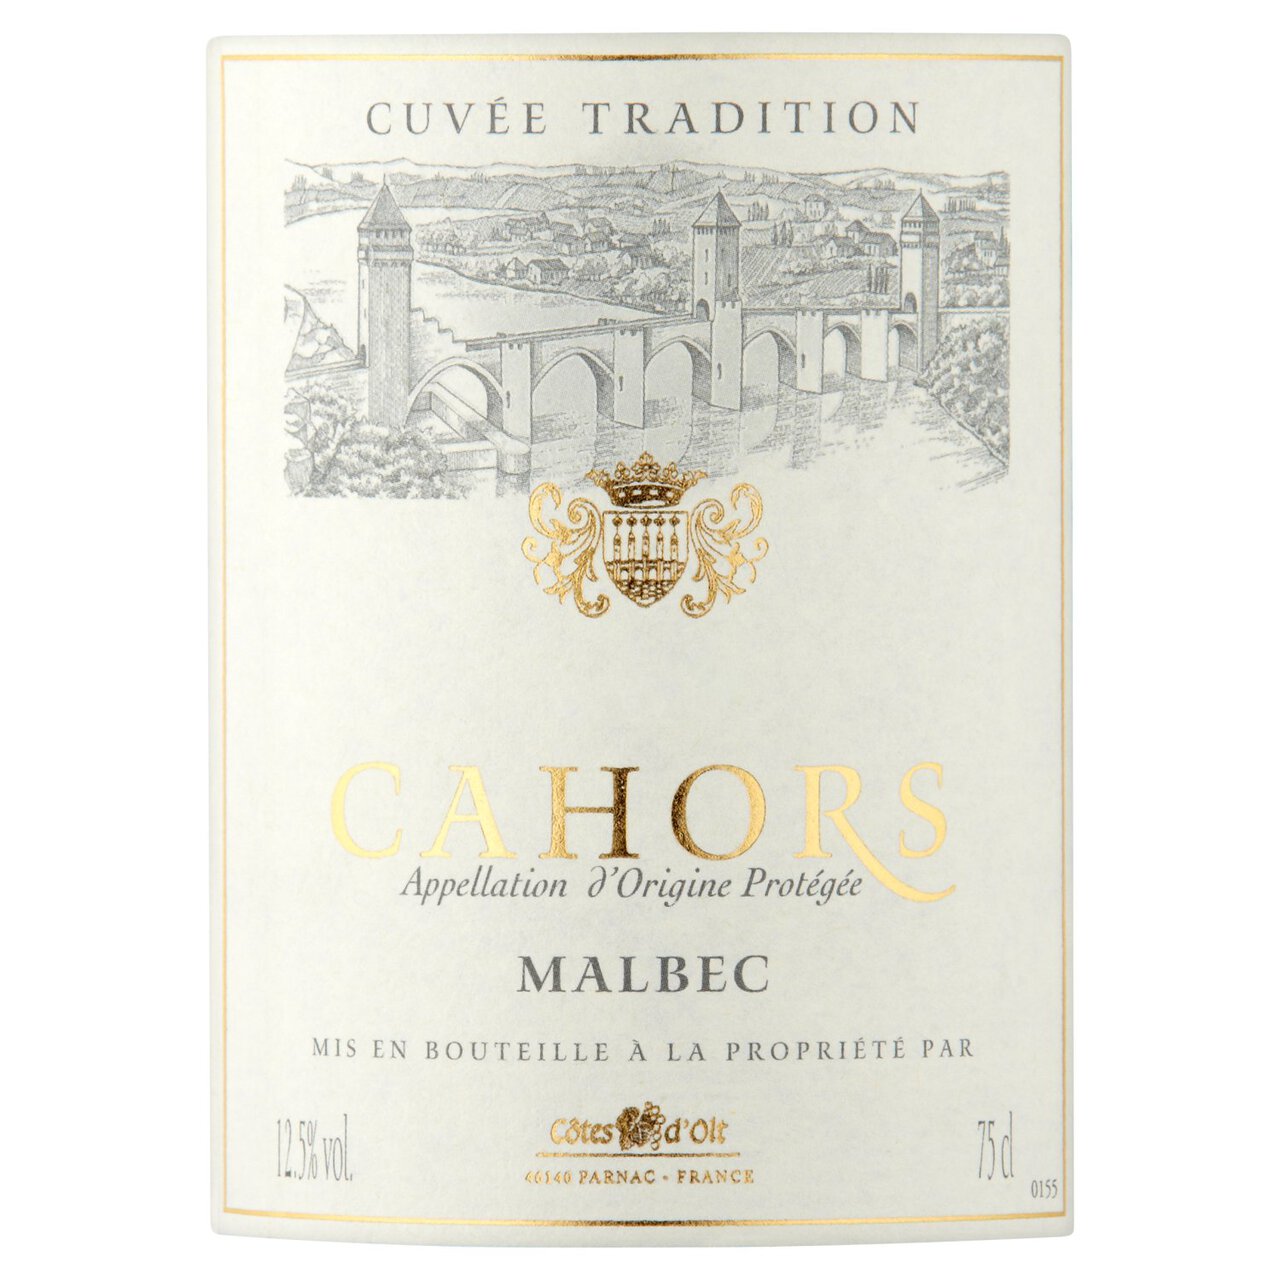 Cuvee Tradition Cahors Malbec 75cl